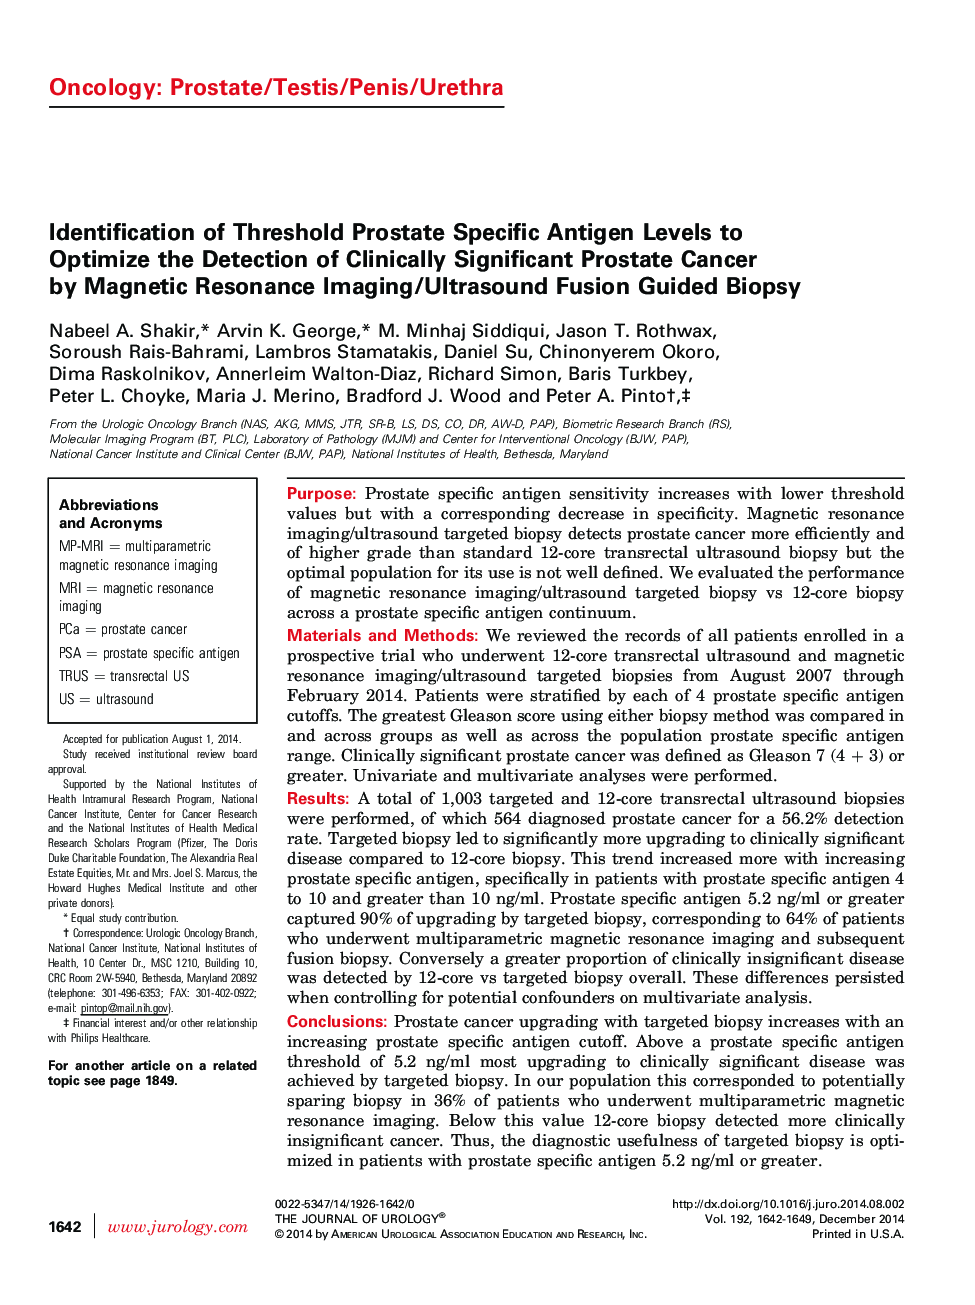 Identification of Threshold Prostate Specific Antigen Levels to Optimize the Detection of Clinically Significant Prostate Cancer by Magnetic Resonance Imaging/Ultrasound Fusion Guided Biopsy 